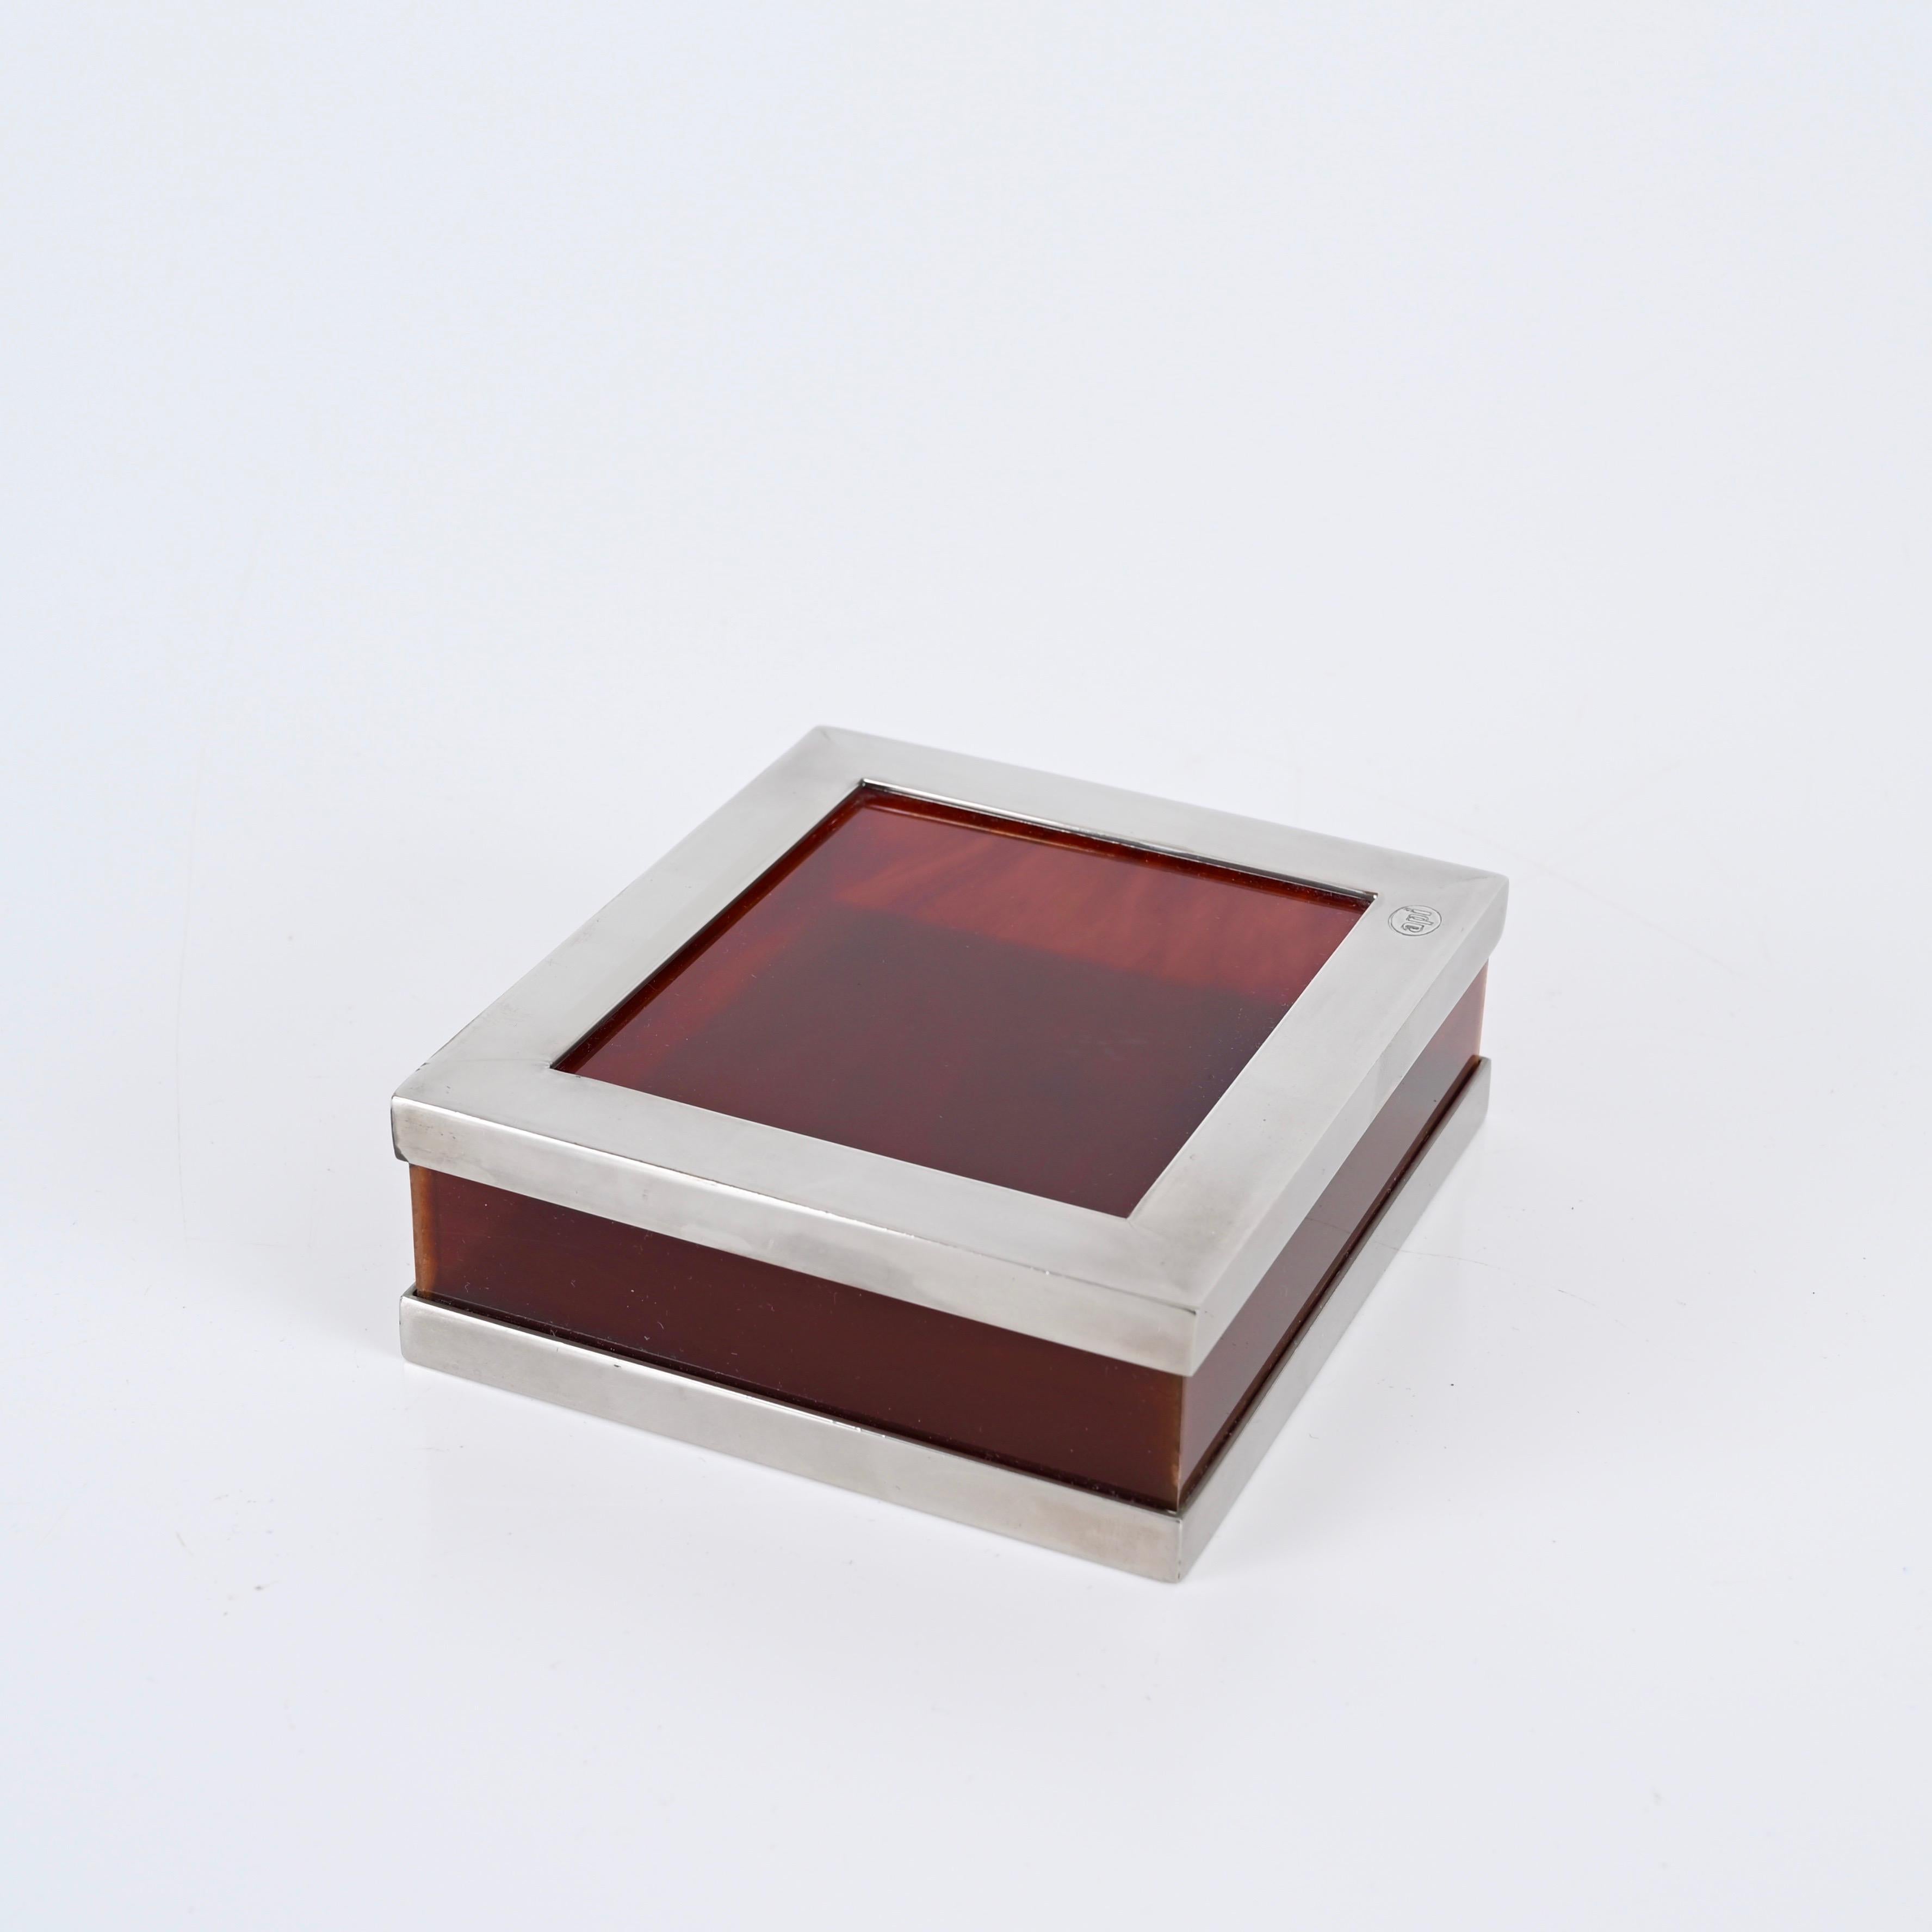 Dior Style Jewel Box in Tortoiseshell Lucite and Chrome, API Italy, 1970s For Sale 2